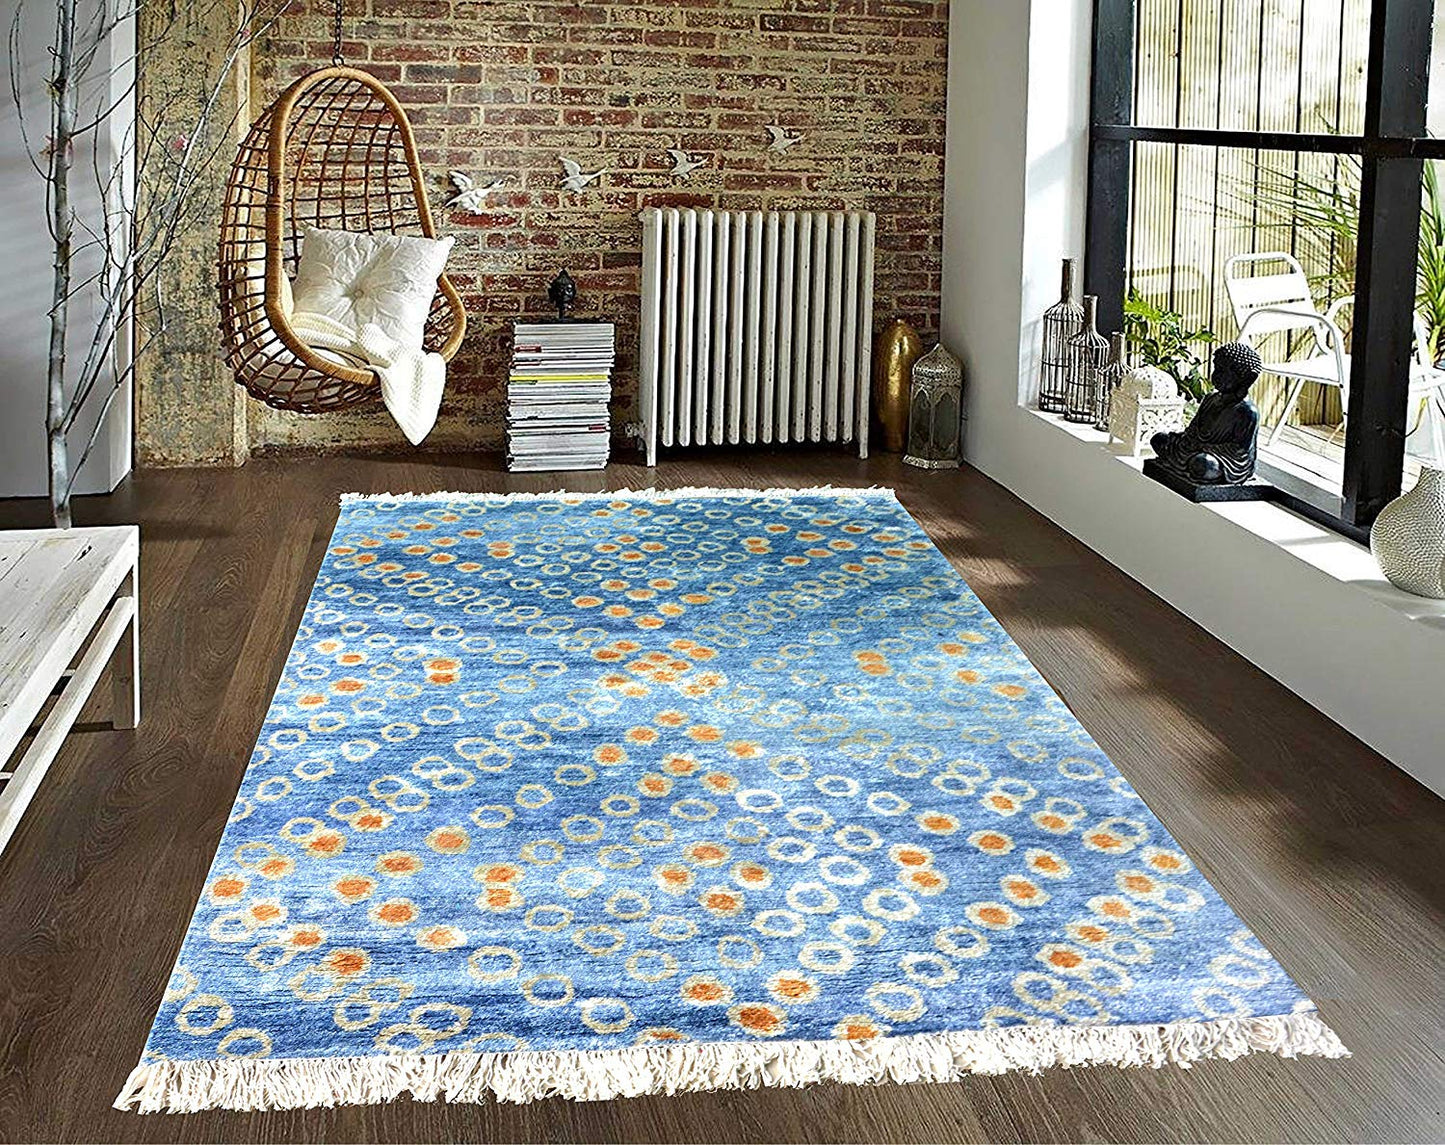 Hand Knotted Silk Carpet Blue Around 225 Knots Per Sq Inch – 120cm x 180cm (~4×6 Feet)- A Gift For Generations